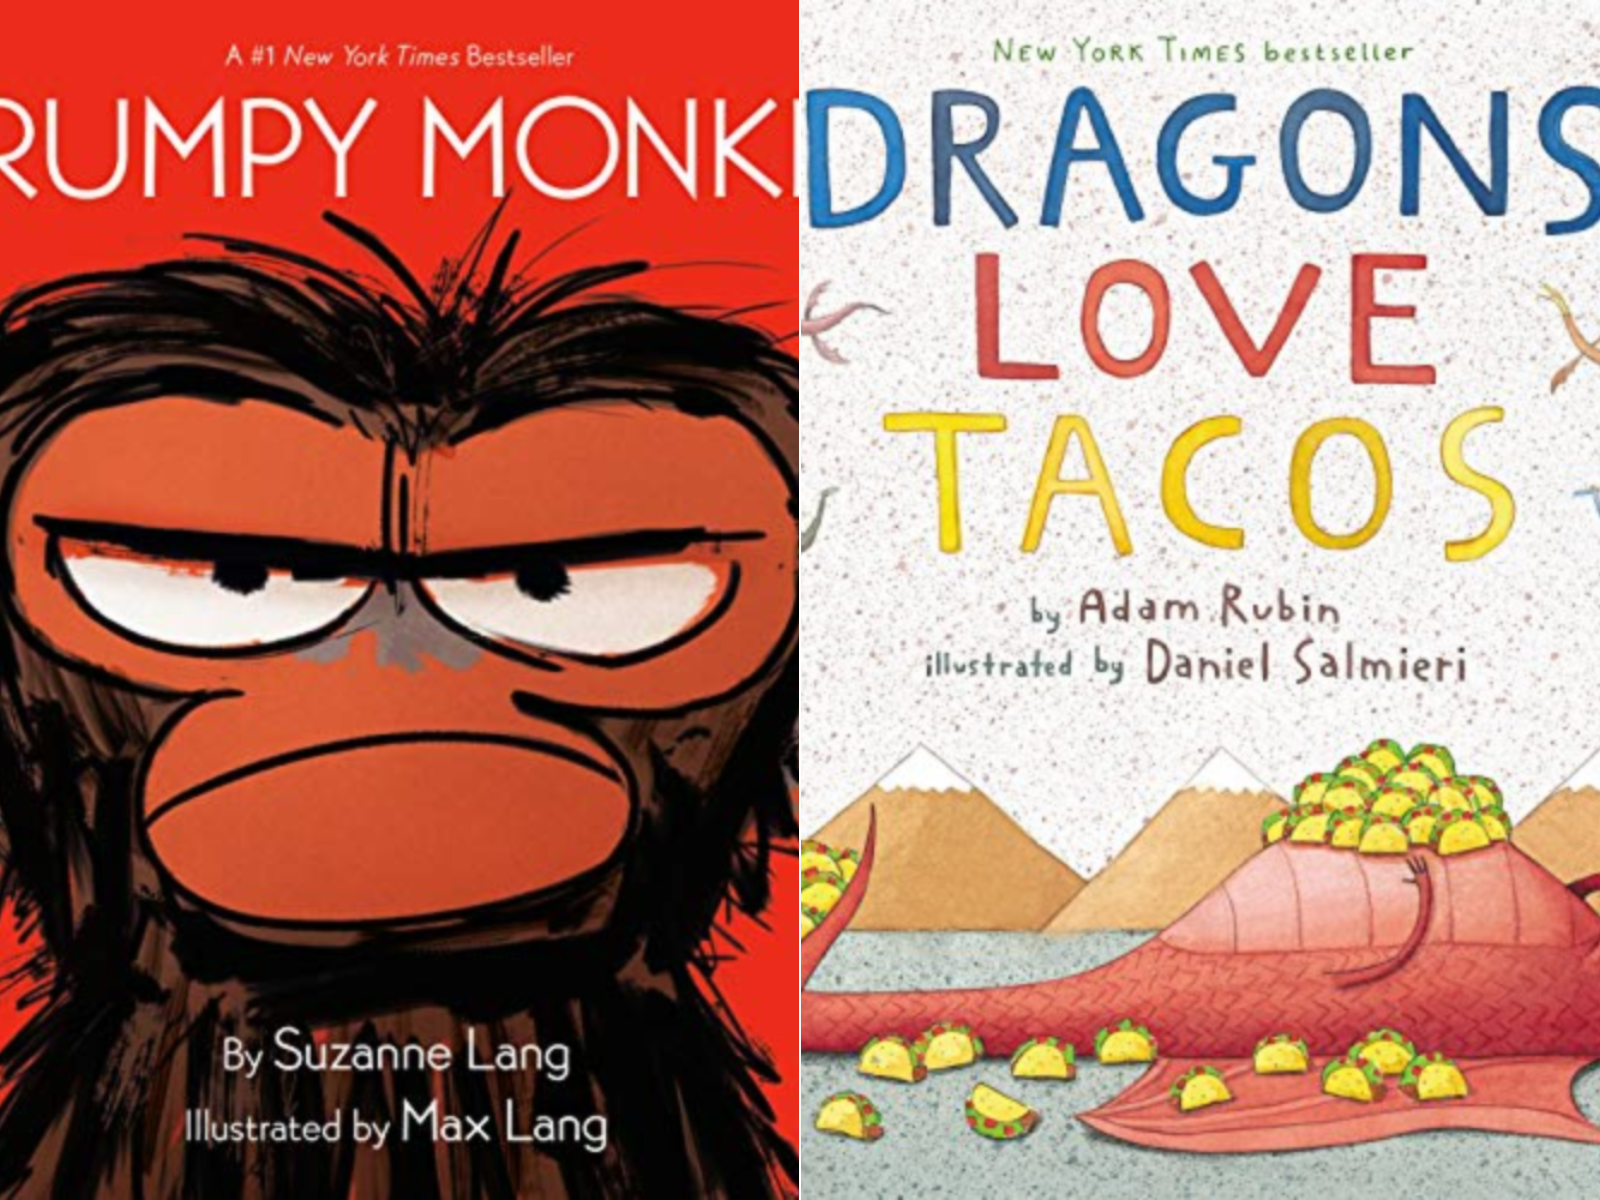 A children's book called Grumpy Monkey and another called Dragons Love Tacos